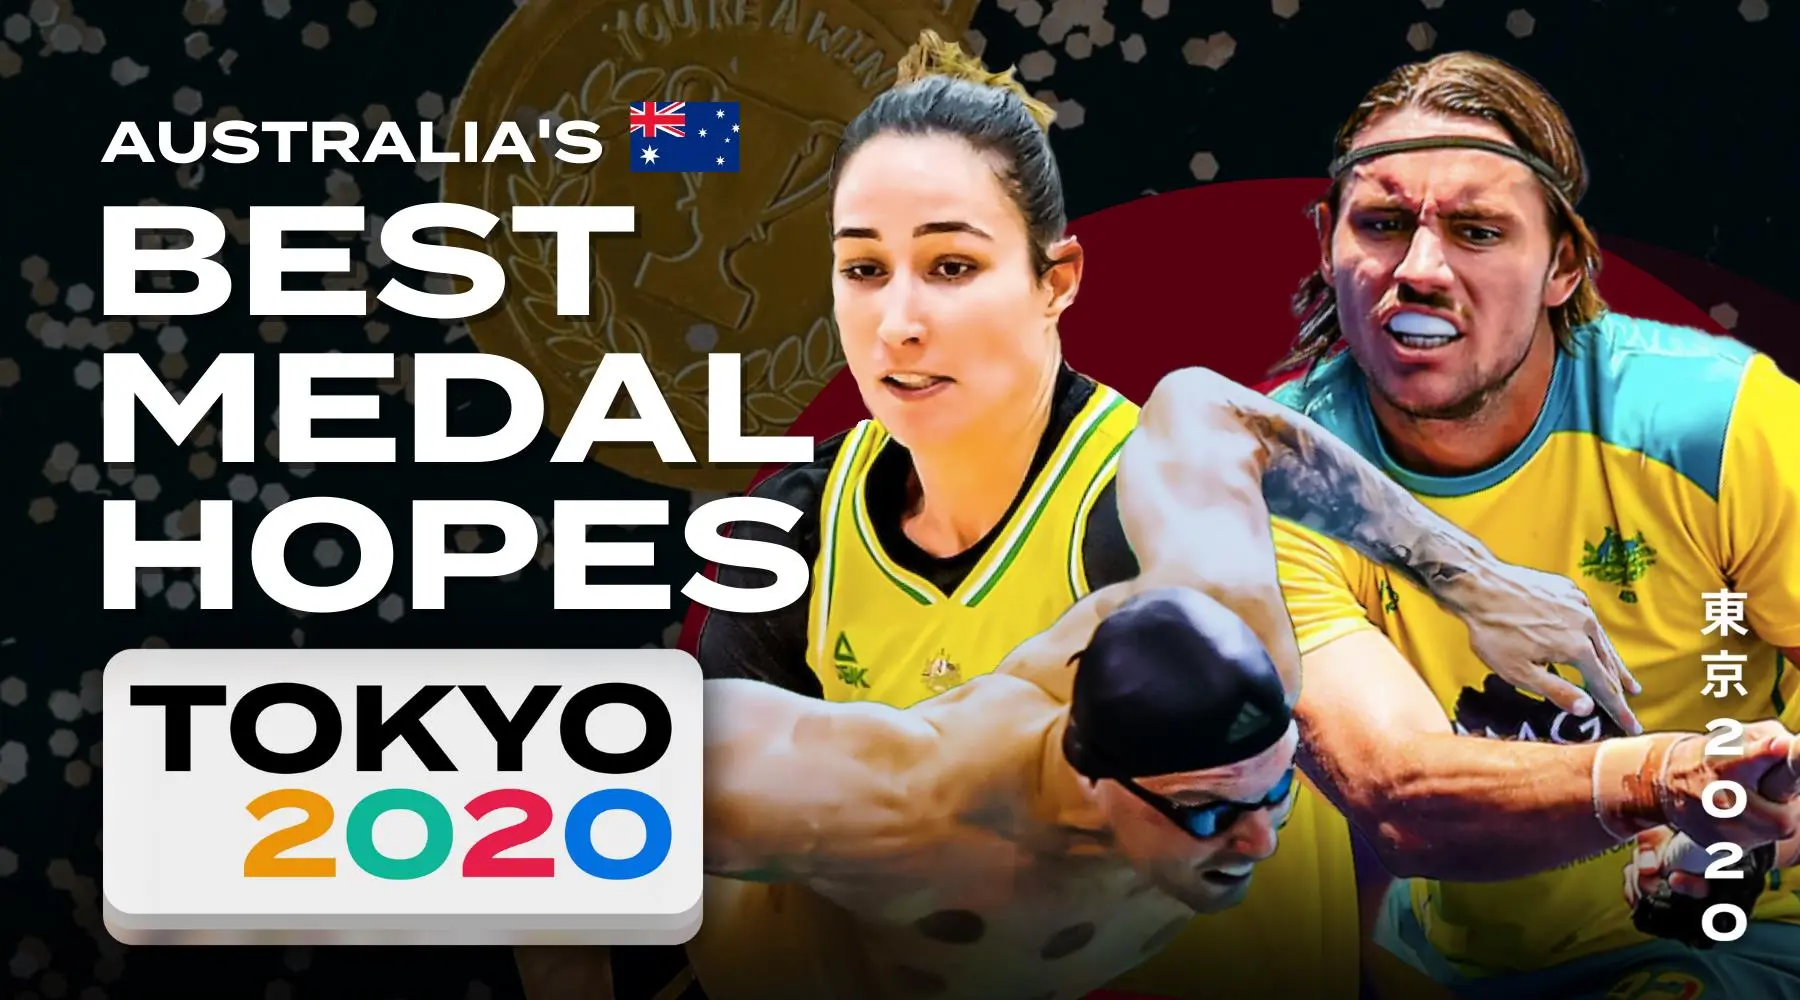 Tokyo 2020: Australia’s best medal hopes at the Olympic Games